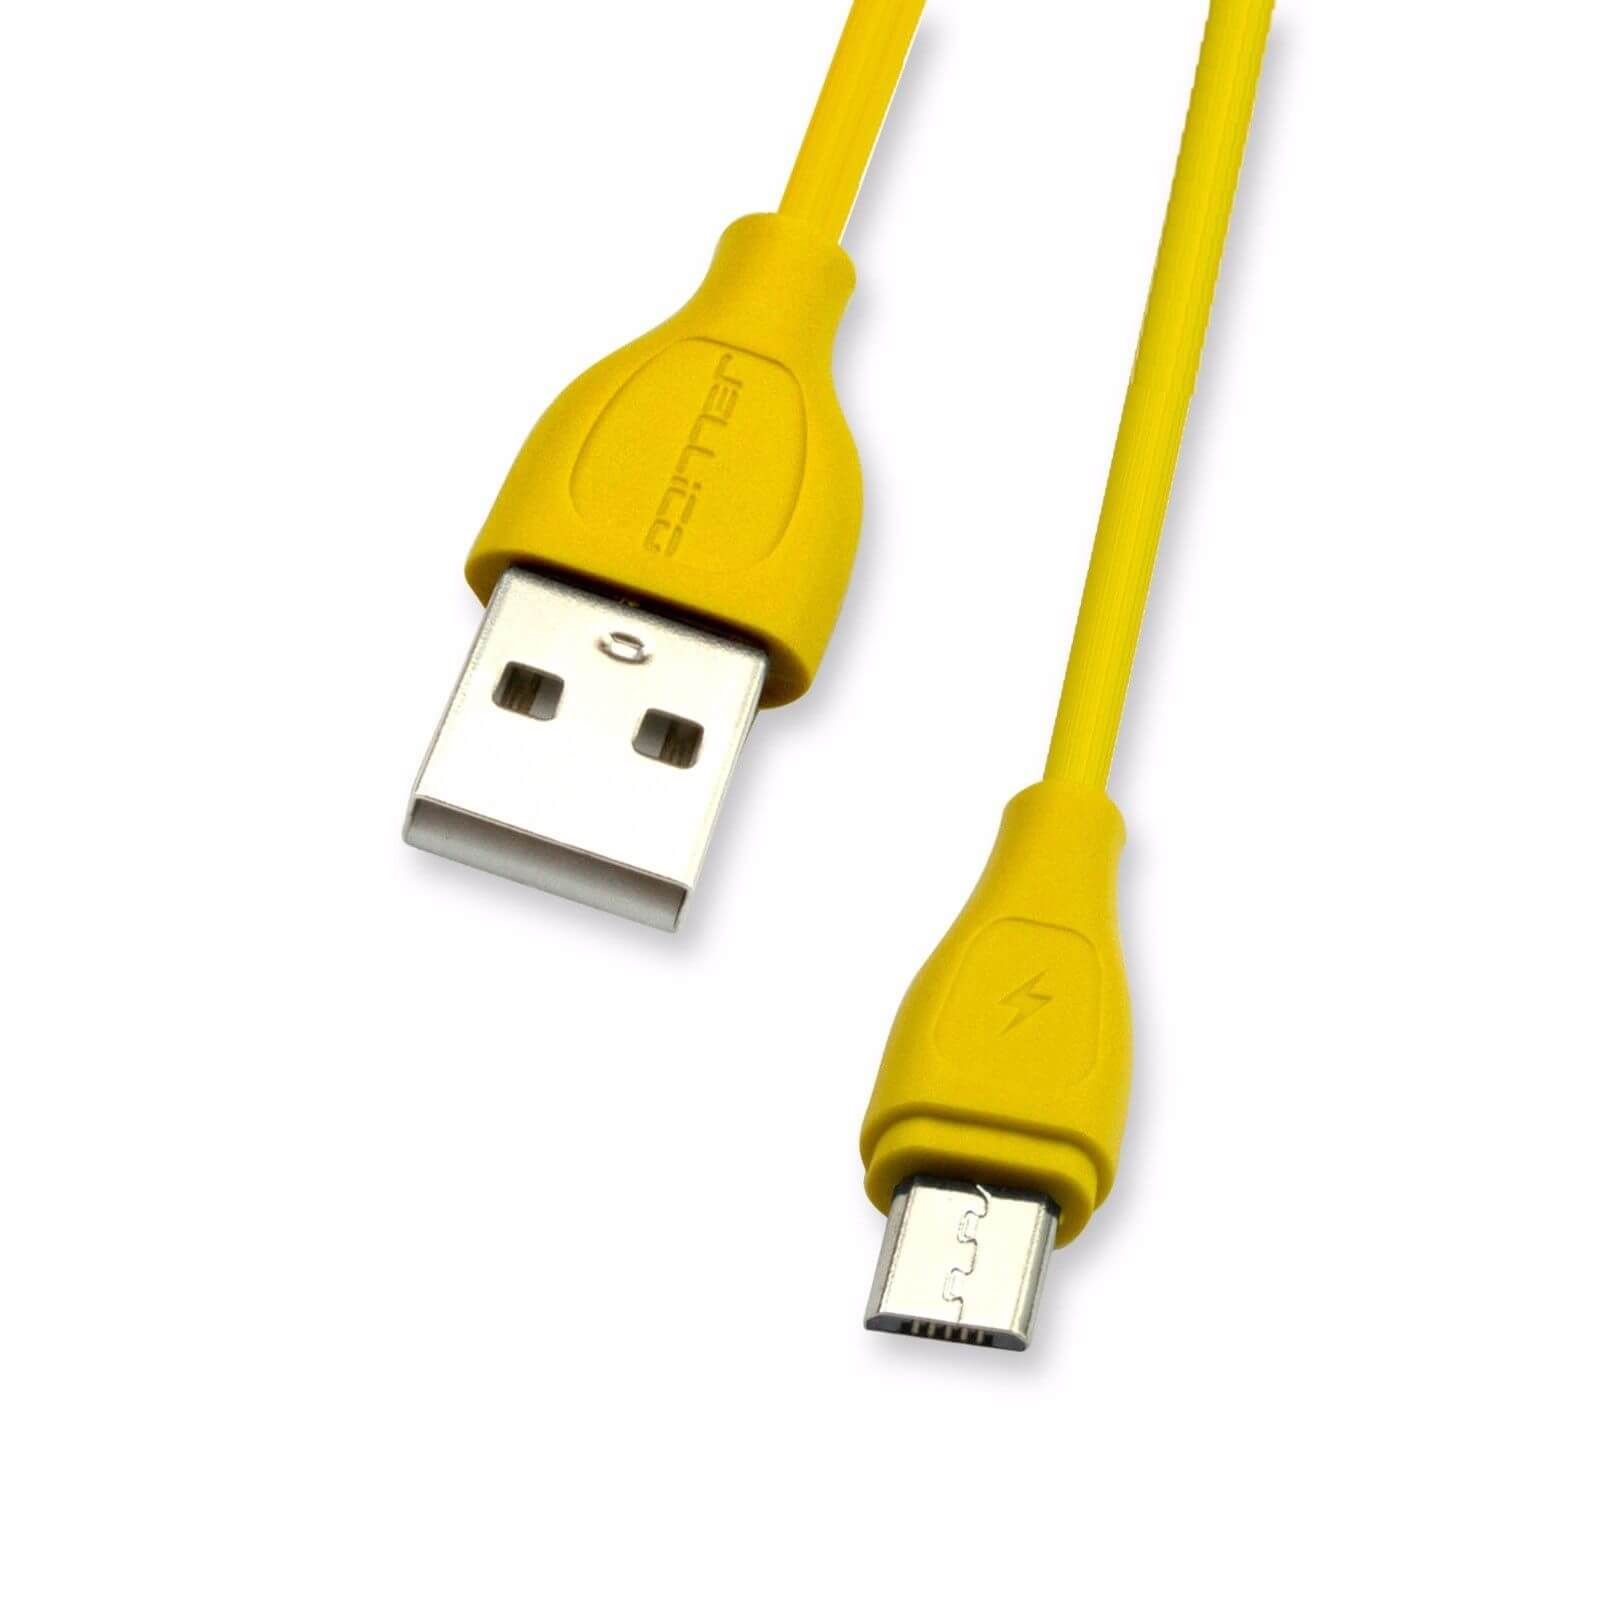 Fast Charge USB MicroB Cable for Samsung Galaxy S4 S5 S7 Note [Yellow] | Printer Base